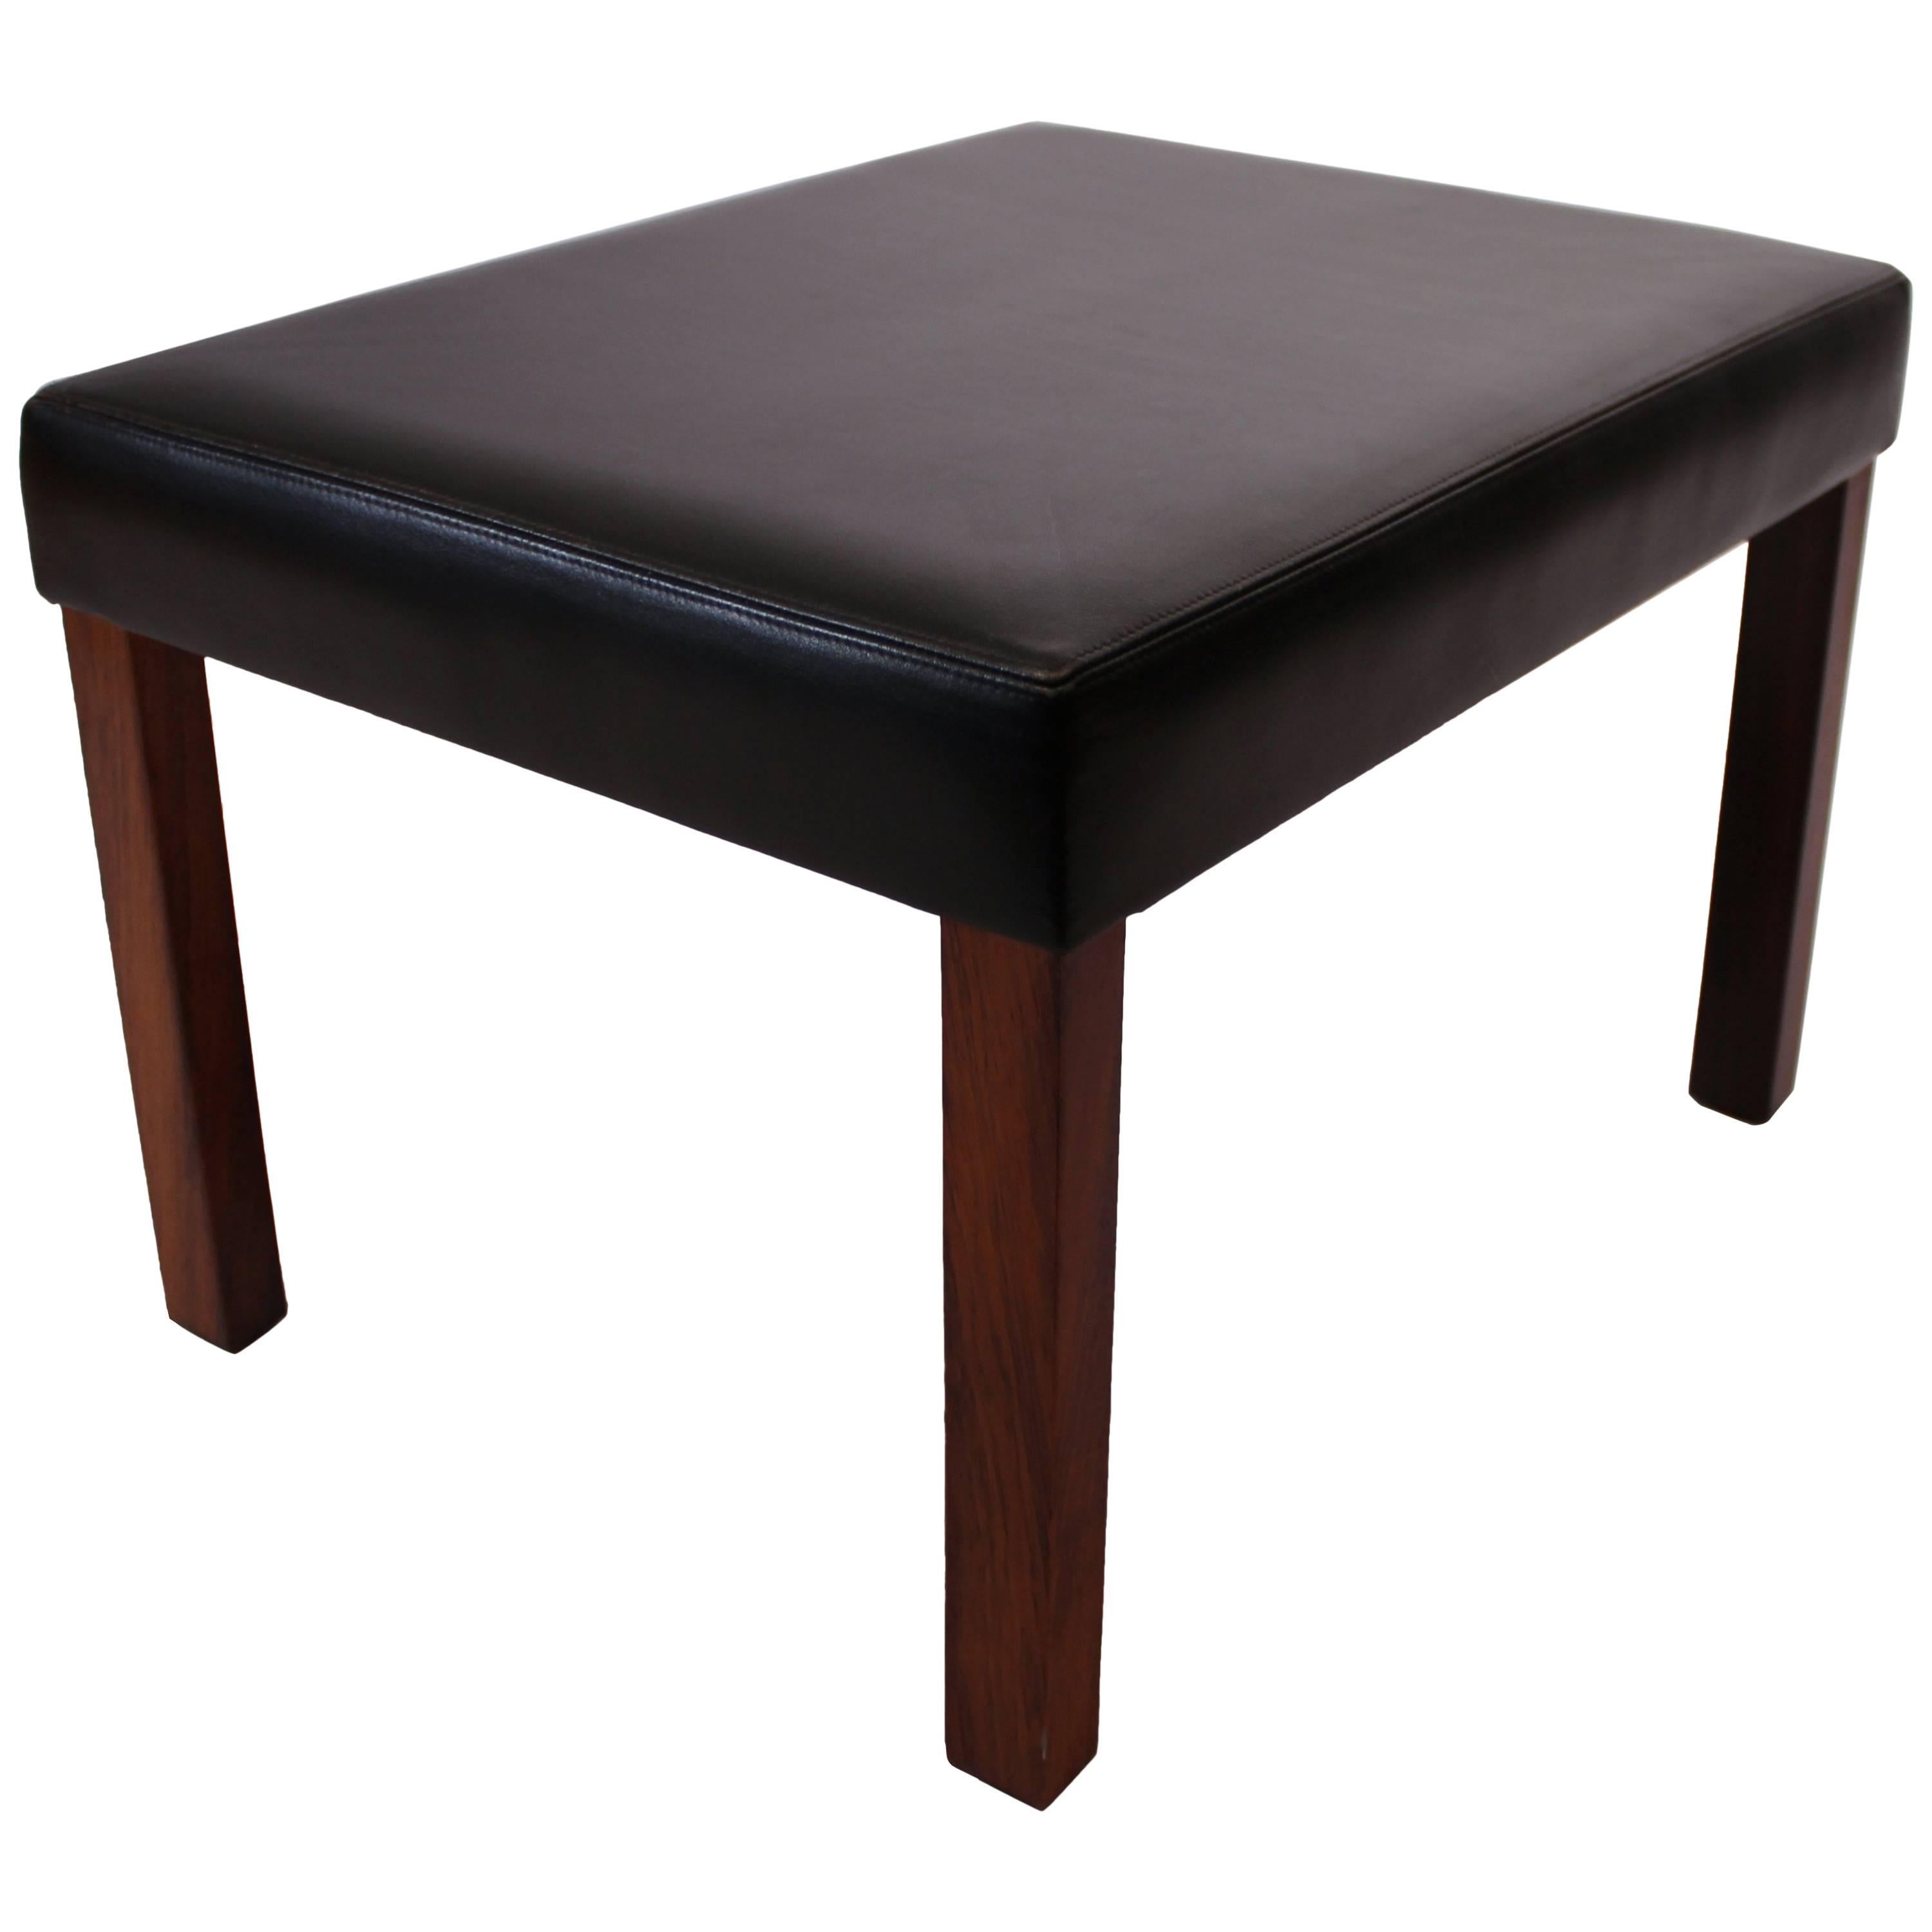 Stool of Rosewood and Black Leather of Danish Design, 1960s